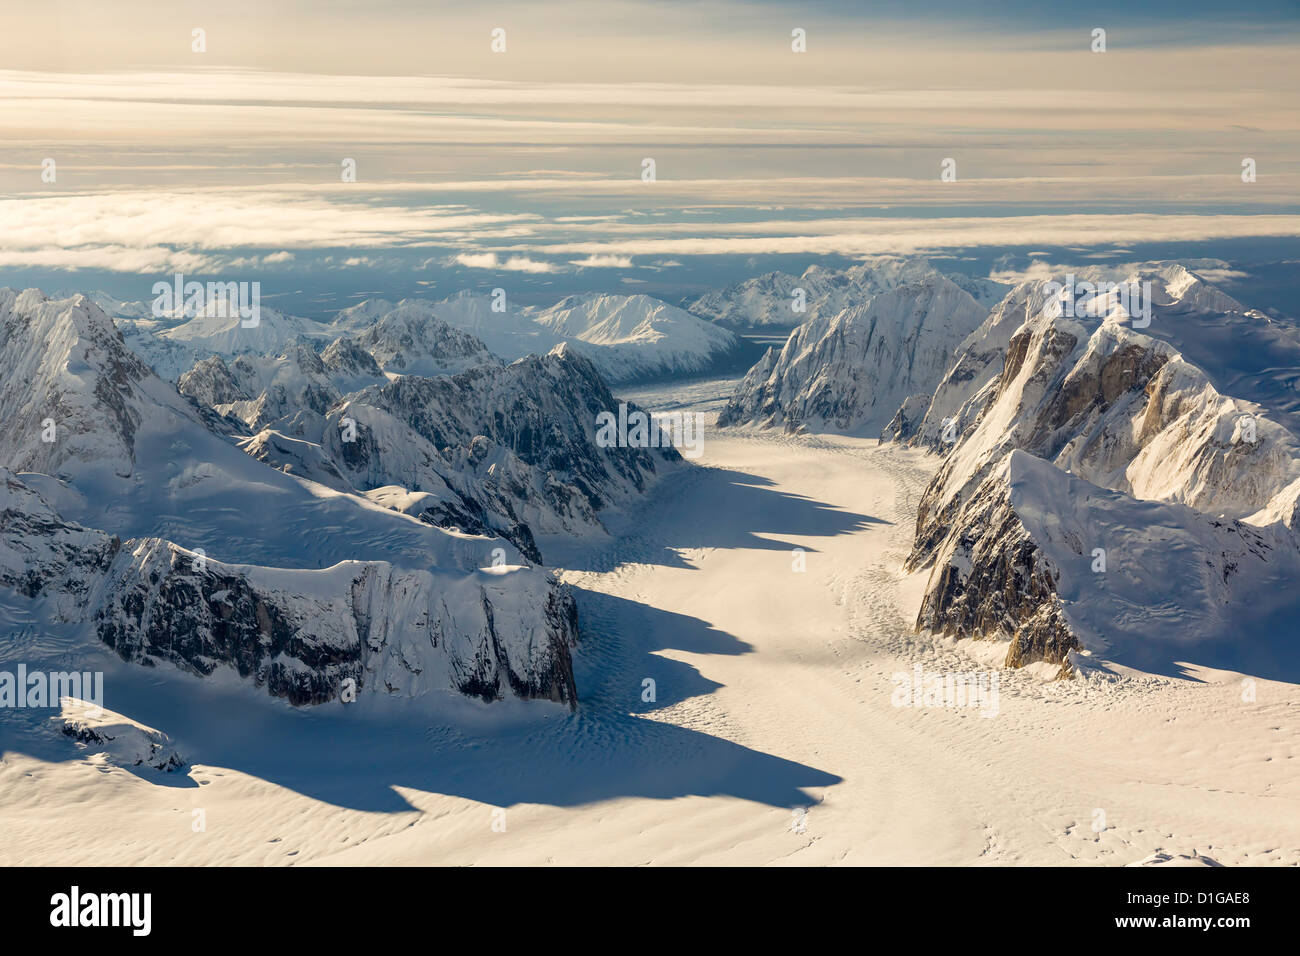 Aerial Of The Ruth Glacier And The Great Gorge On Denali Mt Mckinley